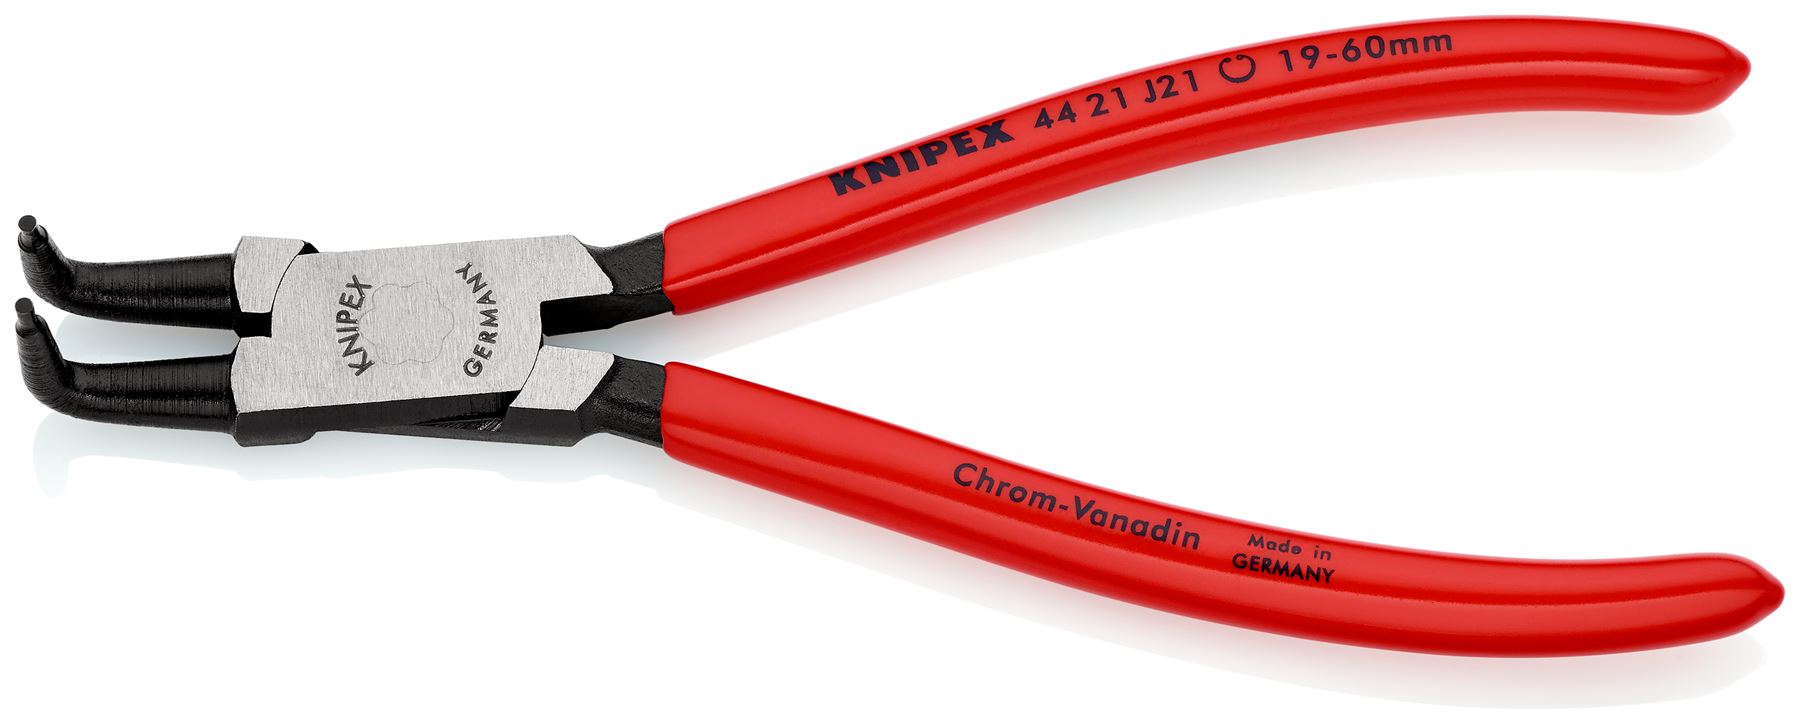 KNIPEX Circlip Pliers for Internal Circlips in Bore Holes Bent Nose 170mm 1.8mm Diameter Tips 44 21 J21